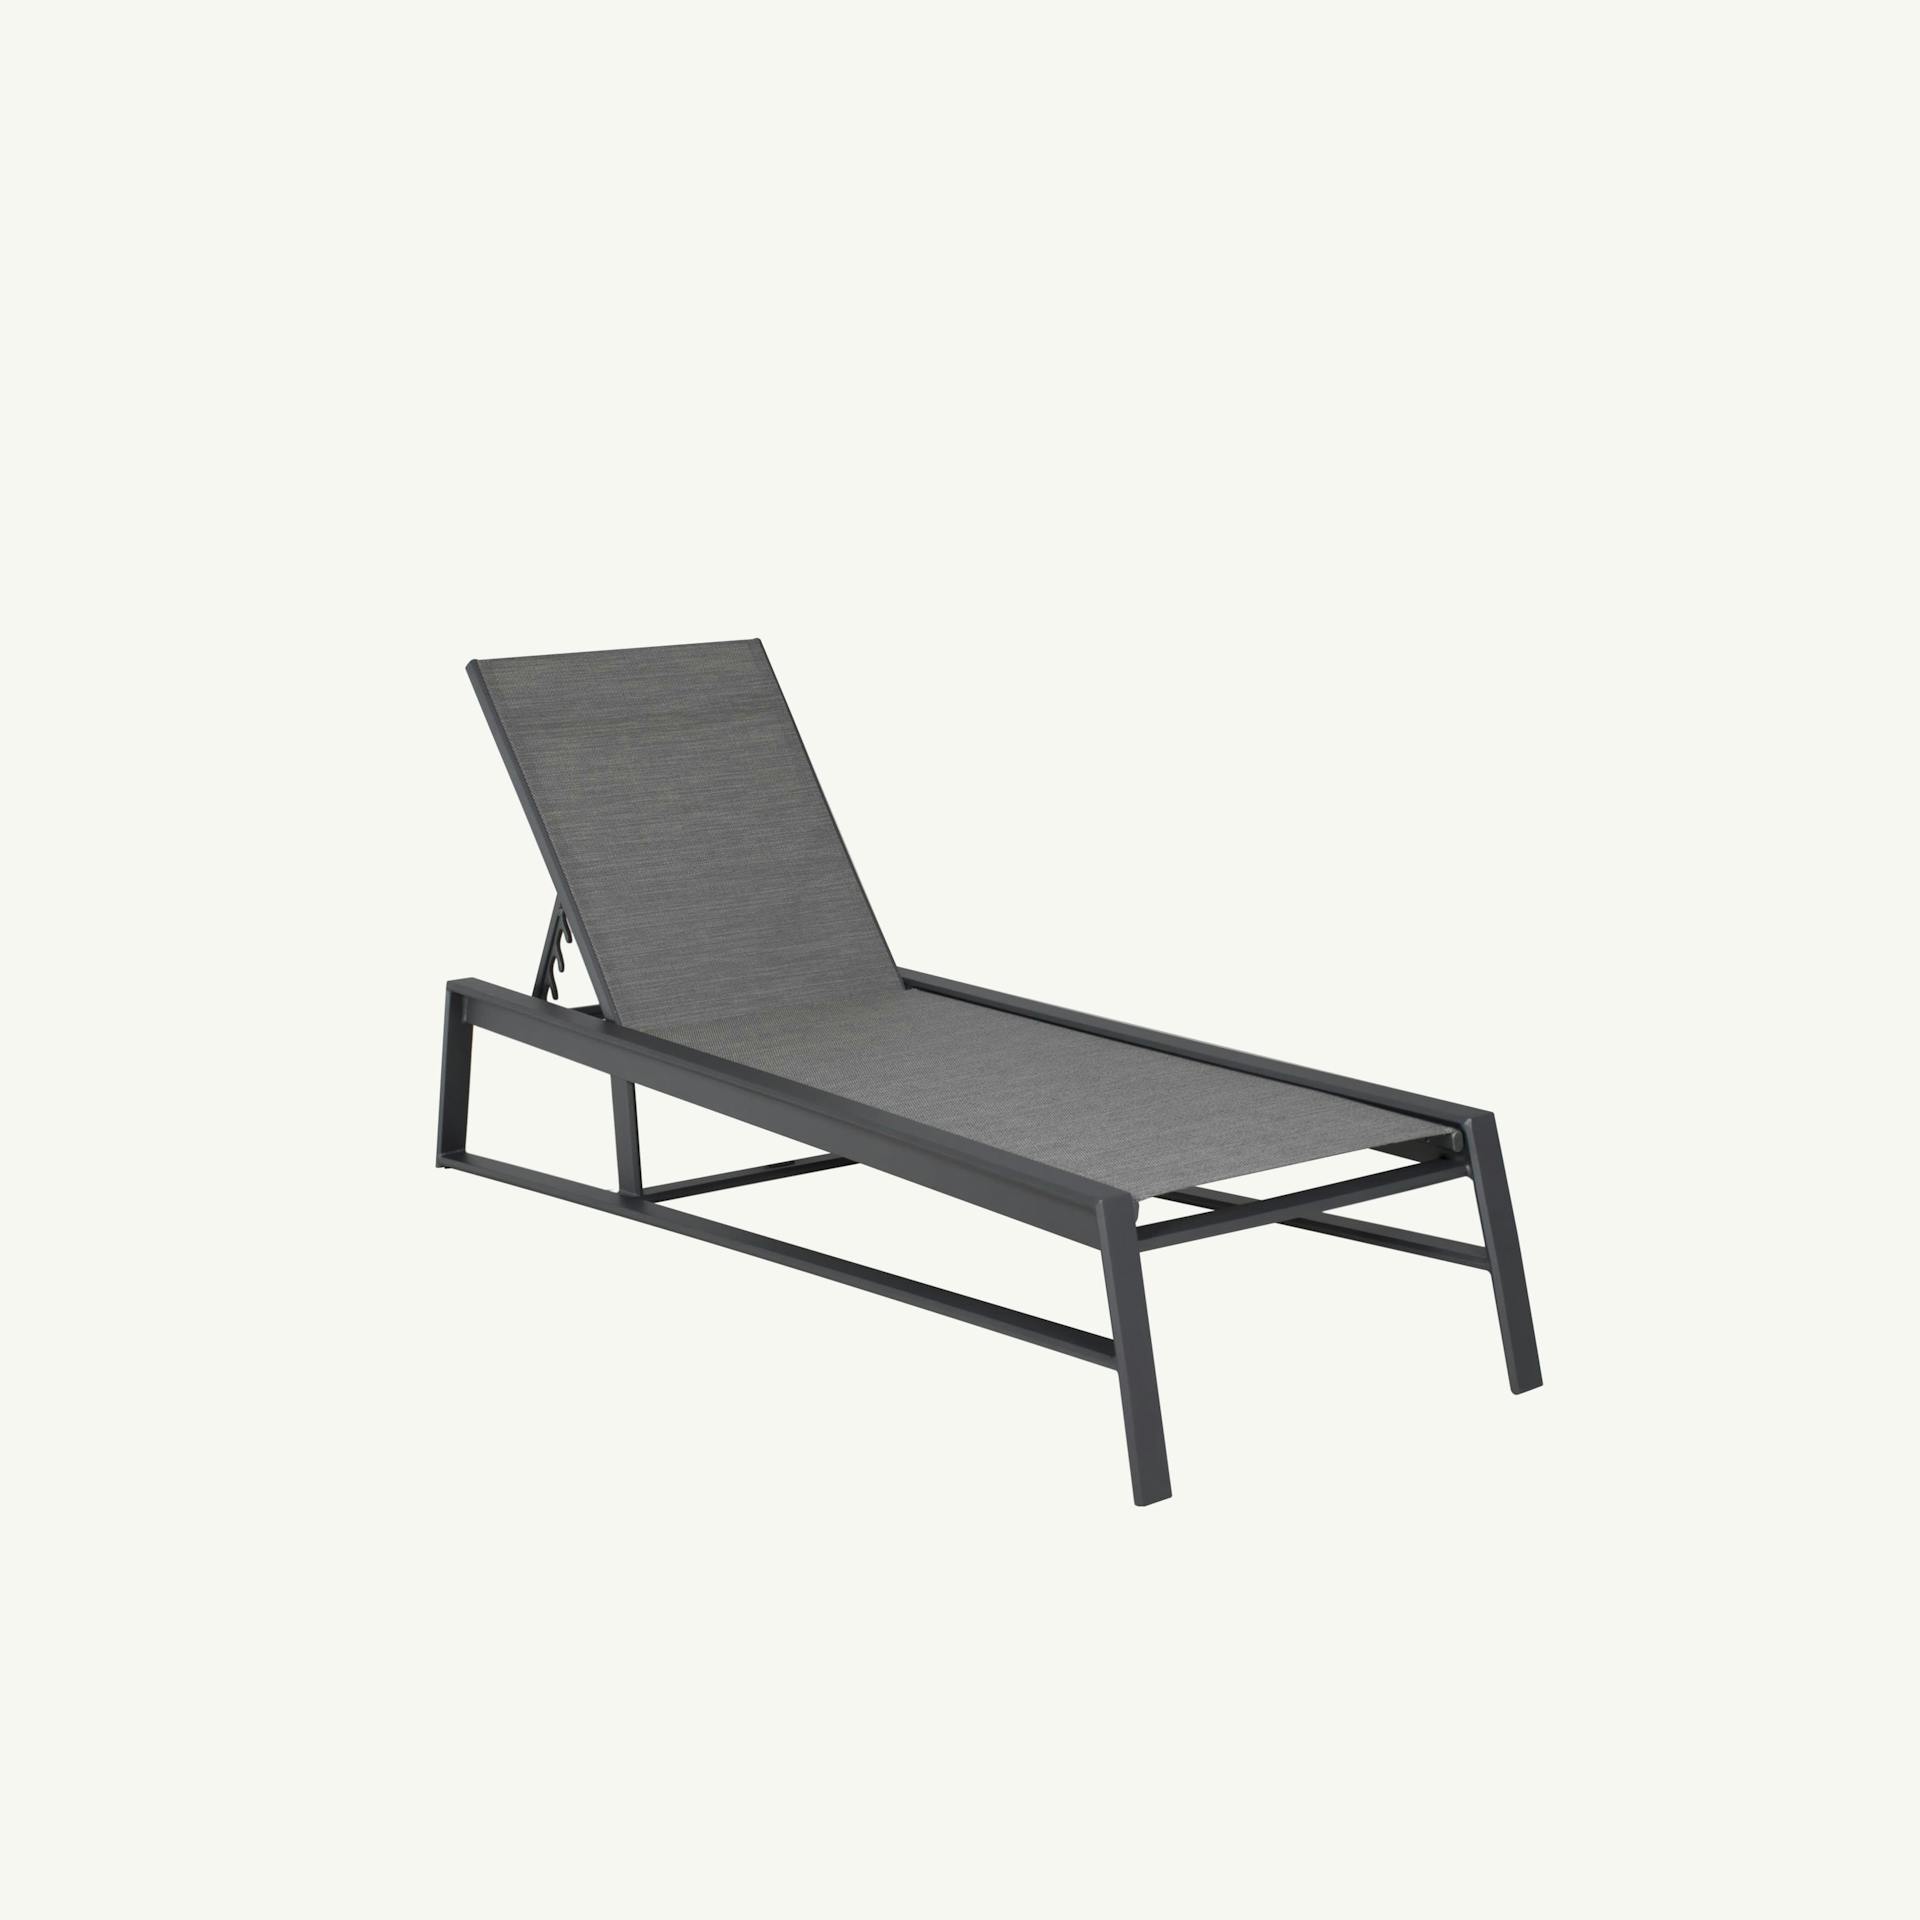 Prism Adjustable Sling Chaise Lounge